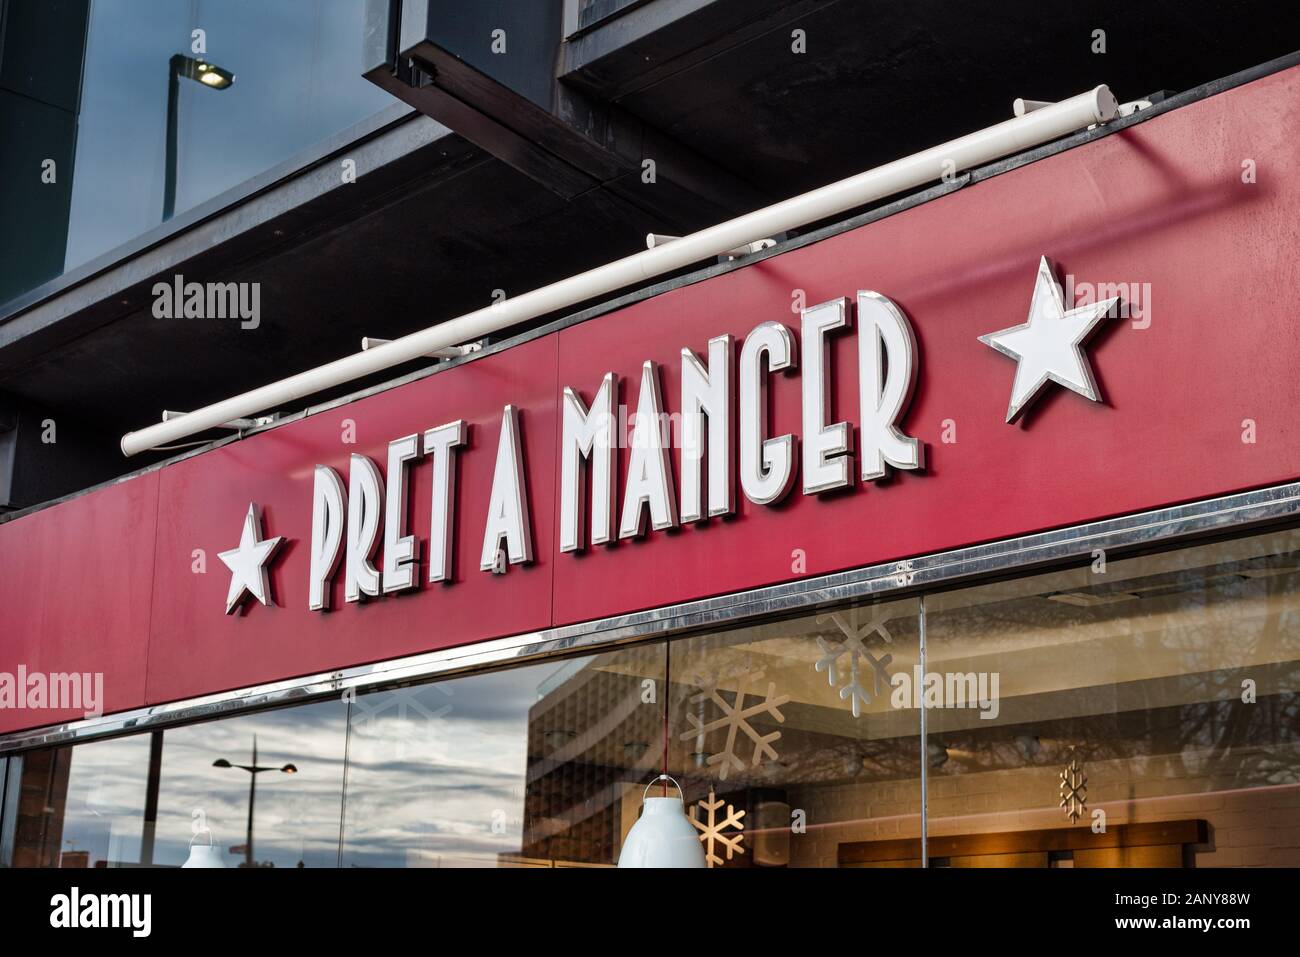 London, UK - Jan 16, 2020:  Sign for Pret A Manger coffee shop in London Stock Photo